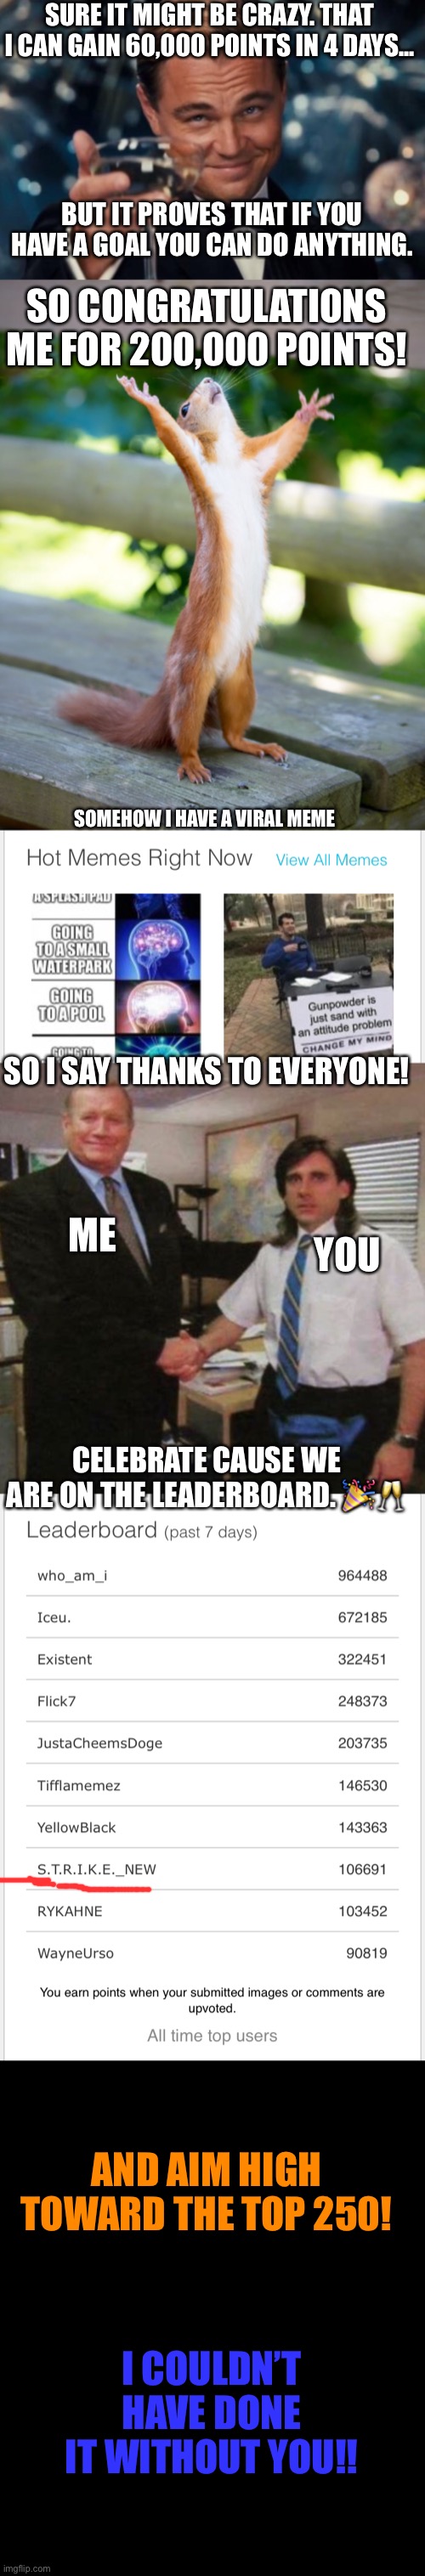 Party in the comments!! | SURE IT MIGHT BE CRAZY. THAT I CAN GAIN 60,000 POINTS IN 4 DAYS... BUT IT PROVES THAT IF YOU HAVE A GOAL YOU CAN DO ANYTHING. SO CONGRATULATIONS ME FOR 200,000 POINTS! SOMEHOW I HAVE A VIRAL MEME; SO I SAY THANKS TO EVERYONE! YOU; ME; CELEBRATE CAUSE WE ARE ON THE LEADERBOARD. 🎉🥂; AND AIM HIGH TOWARD THE TOP 250! I COULDN’T HAVE DONE IT WITHOUT YOU!! | made w/ Imgflip meme maker